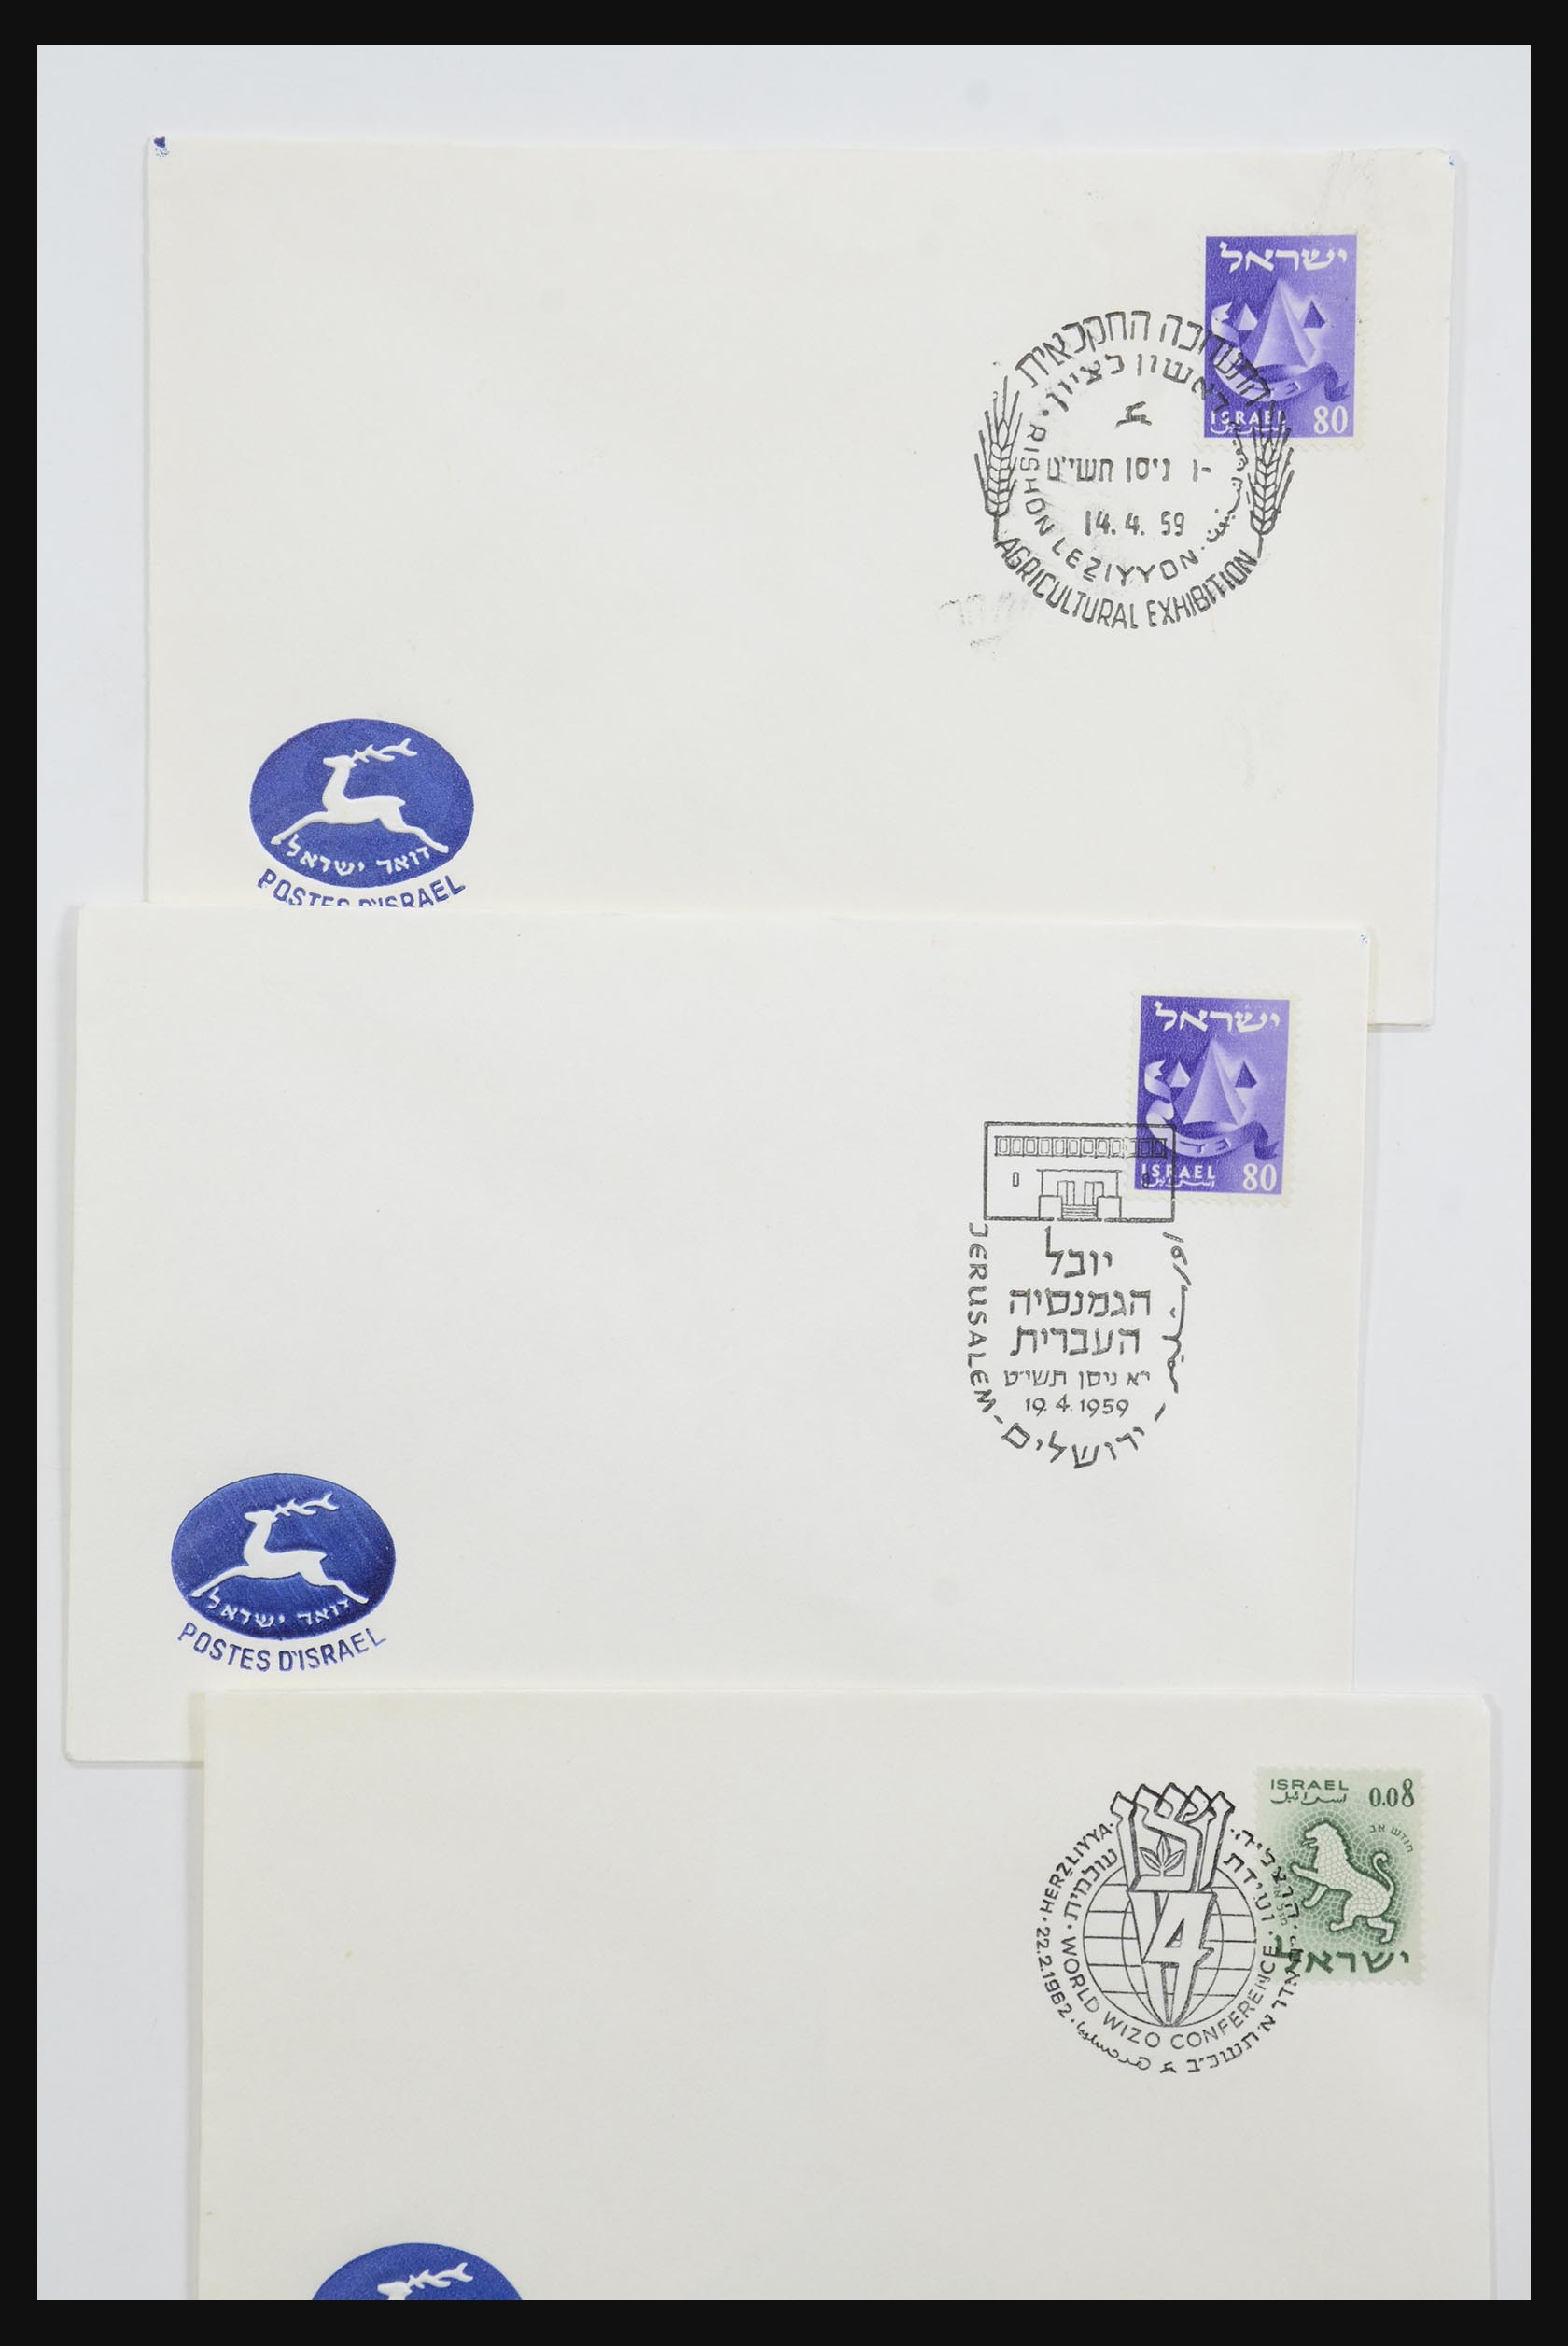 31924 041 - 31924 Israël fdc-collectie 1957-2003.